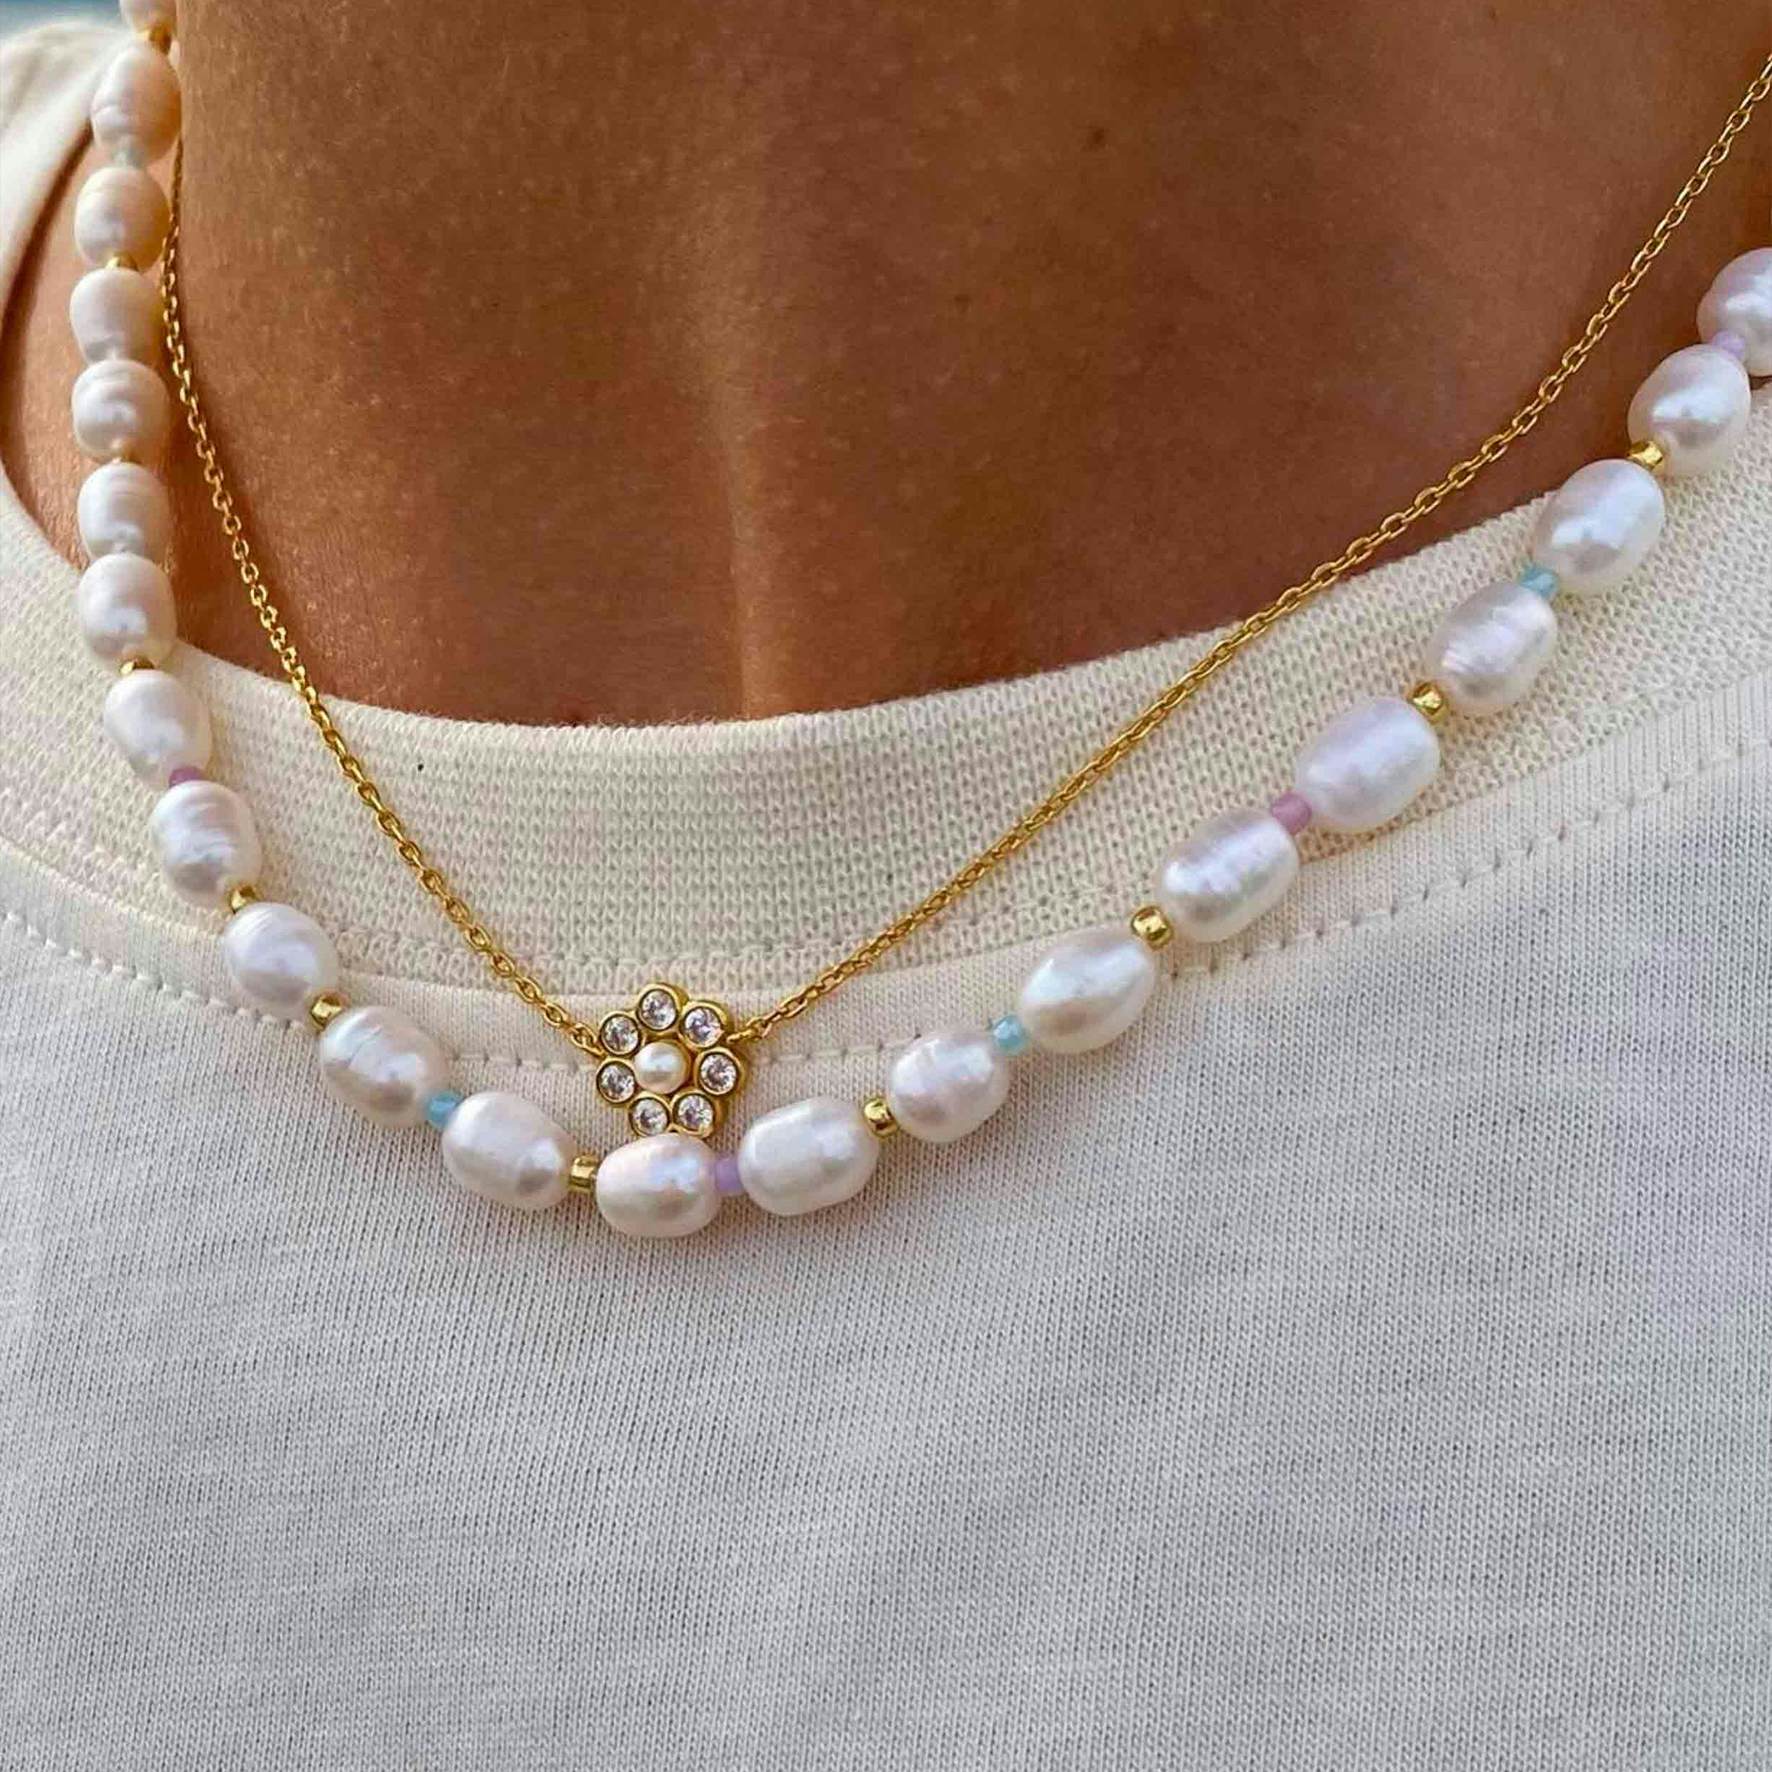 Aya Necklace from Hultquist Copenhagen in Goldplated-Silver Sterling 925|, Freshwater Pearl|Blank